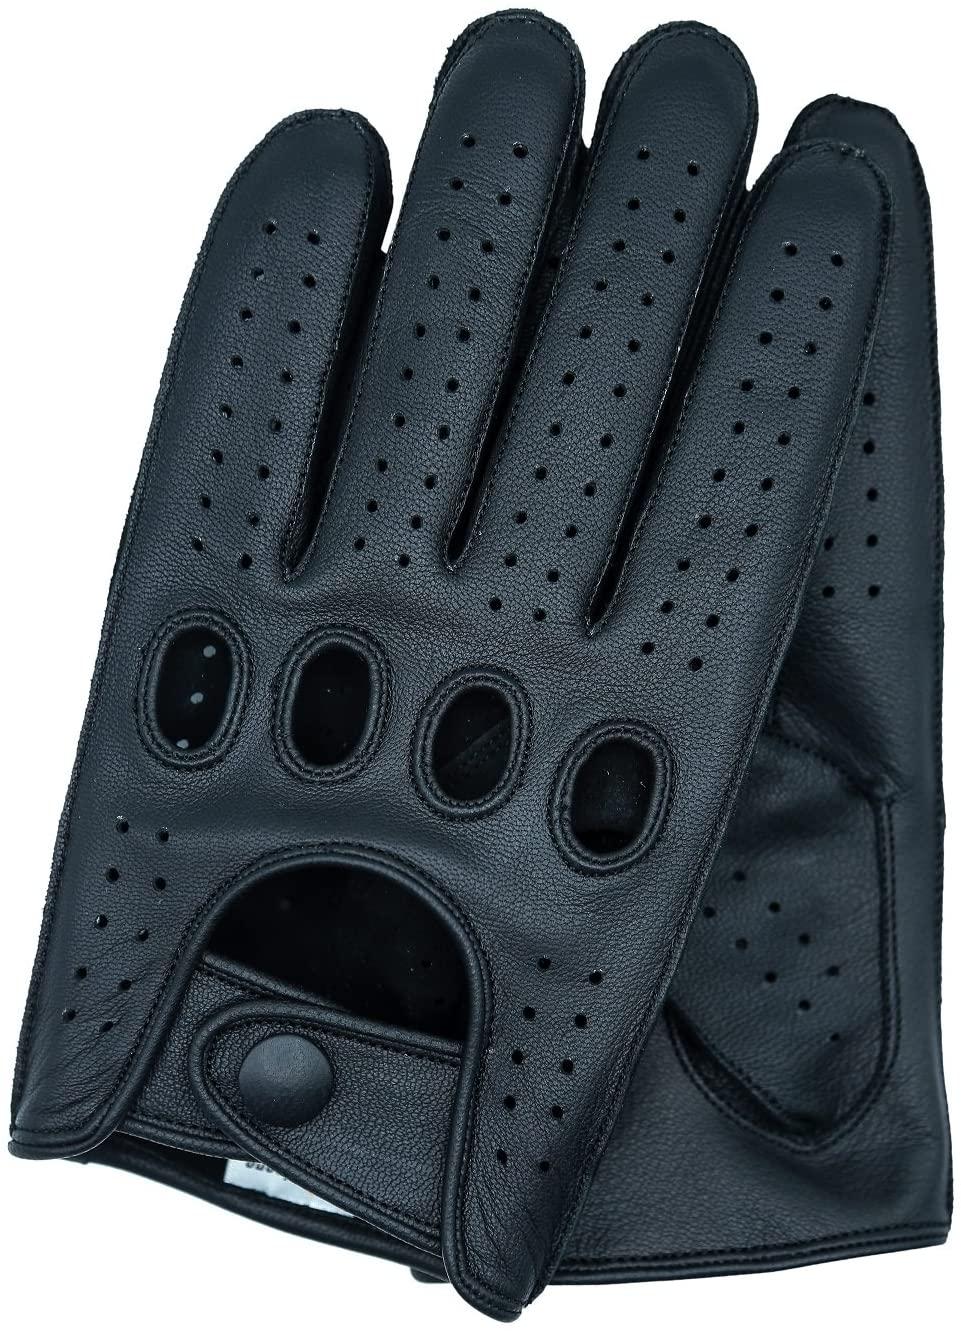 Triton Driving Gloves by Cafe Leather